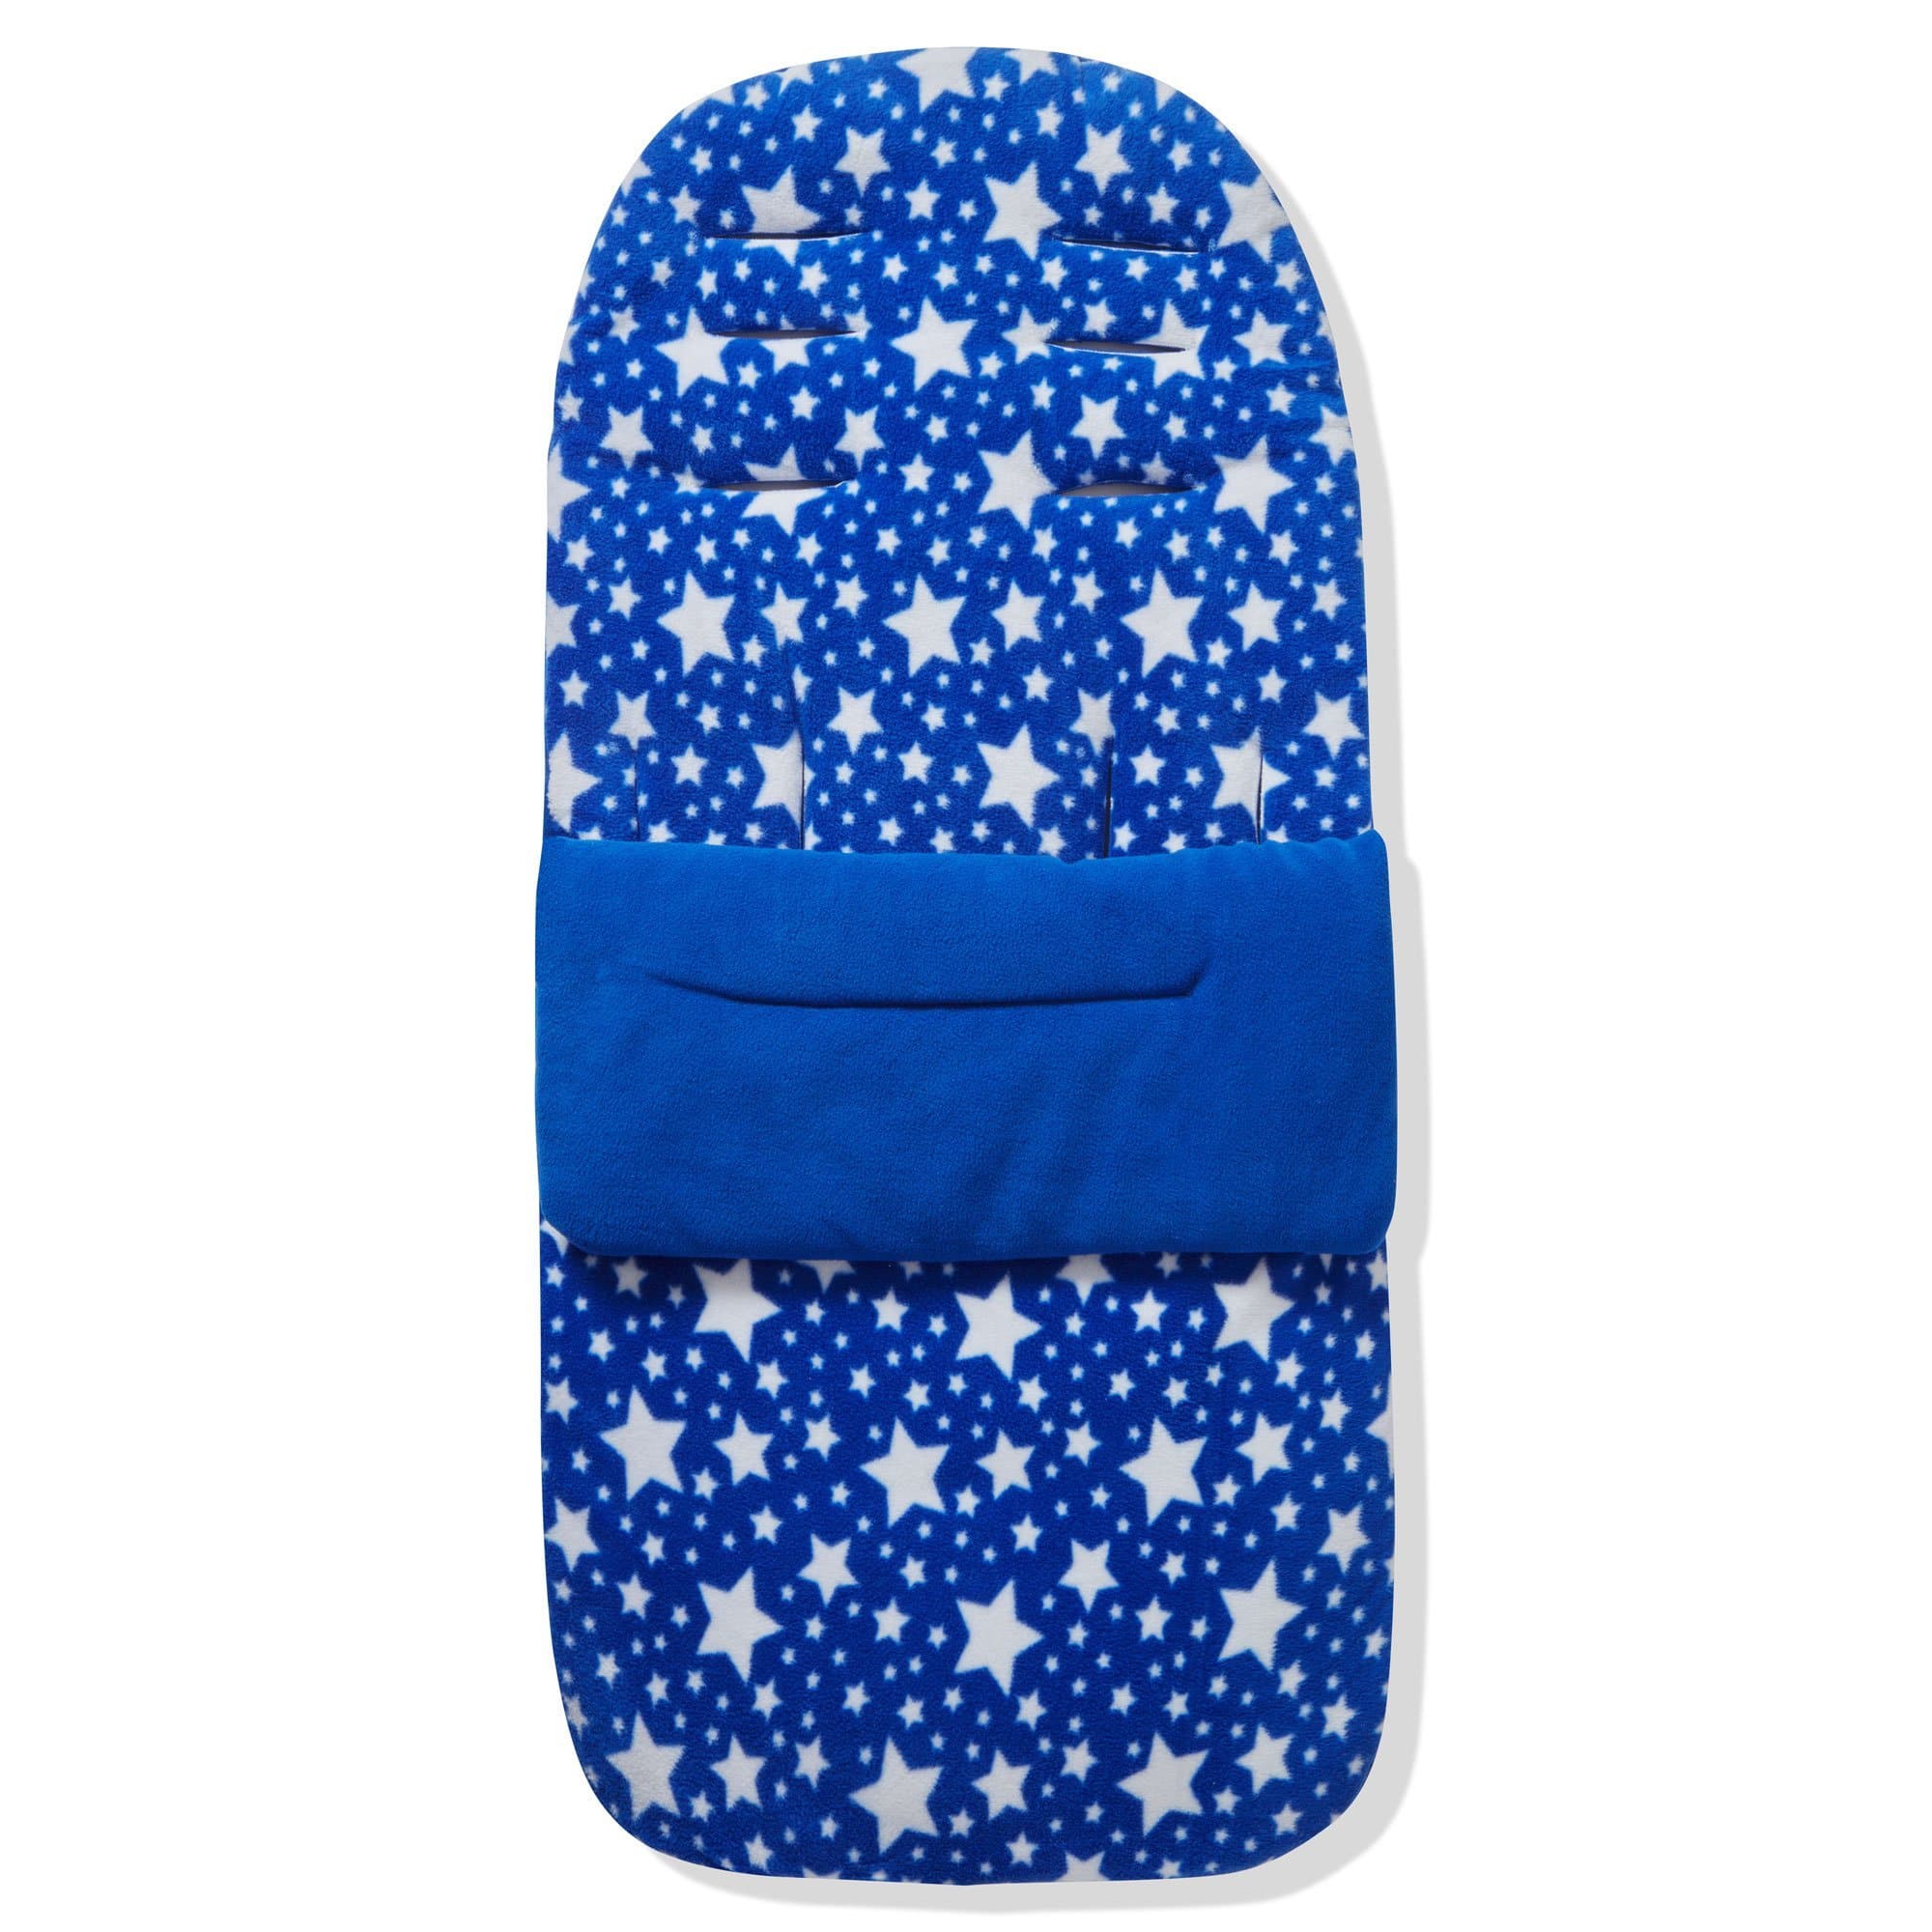 Fleece Footmuff / Cosy Toes Compatible With Brevi - Blue Star / Fits All Models | For Your Little One